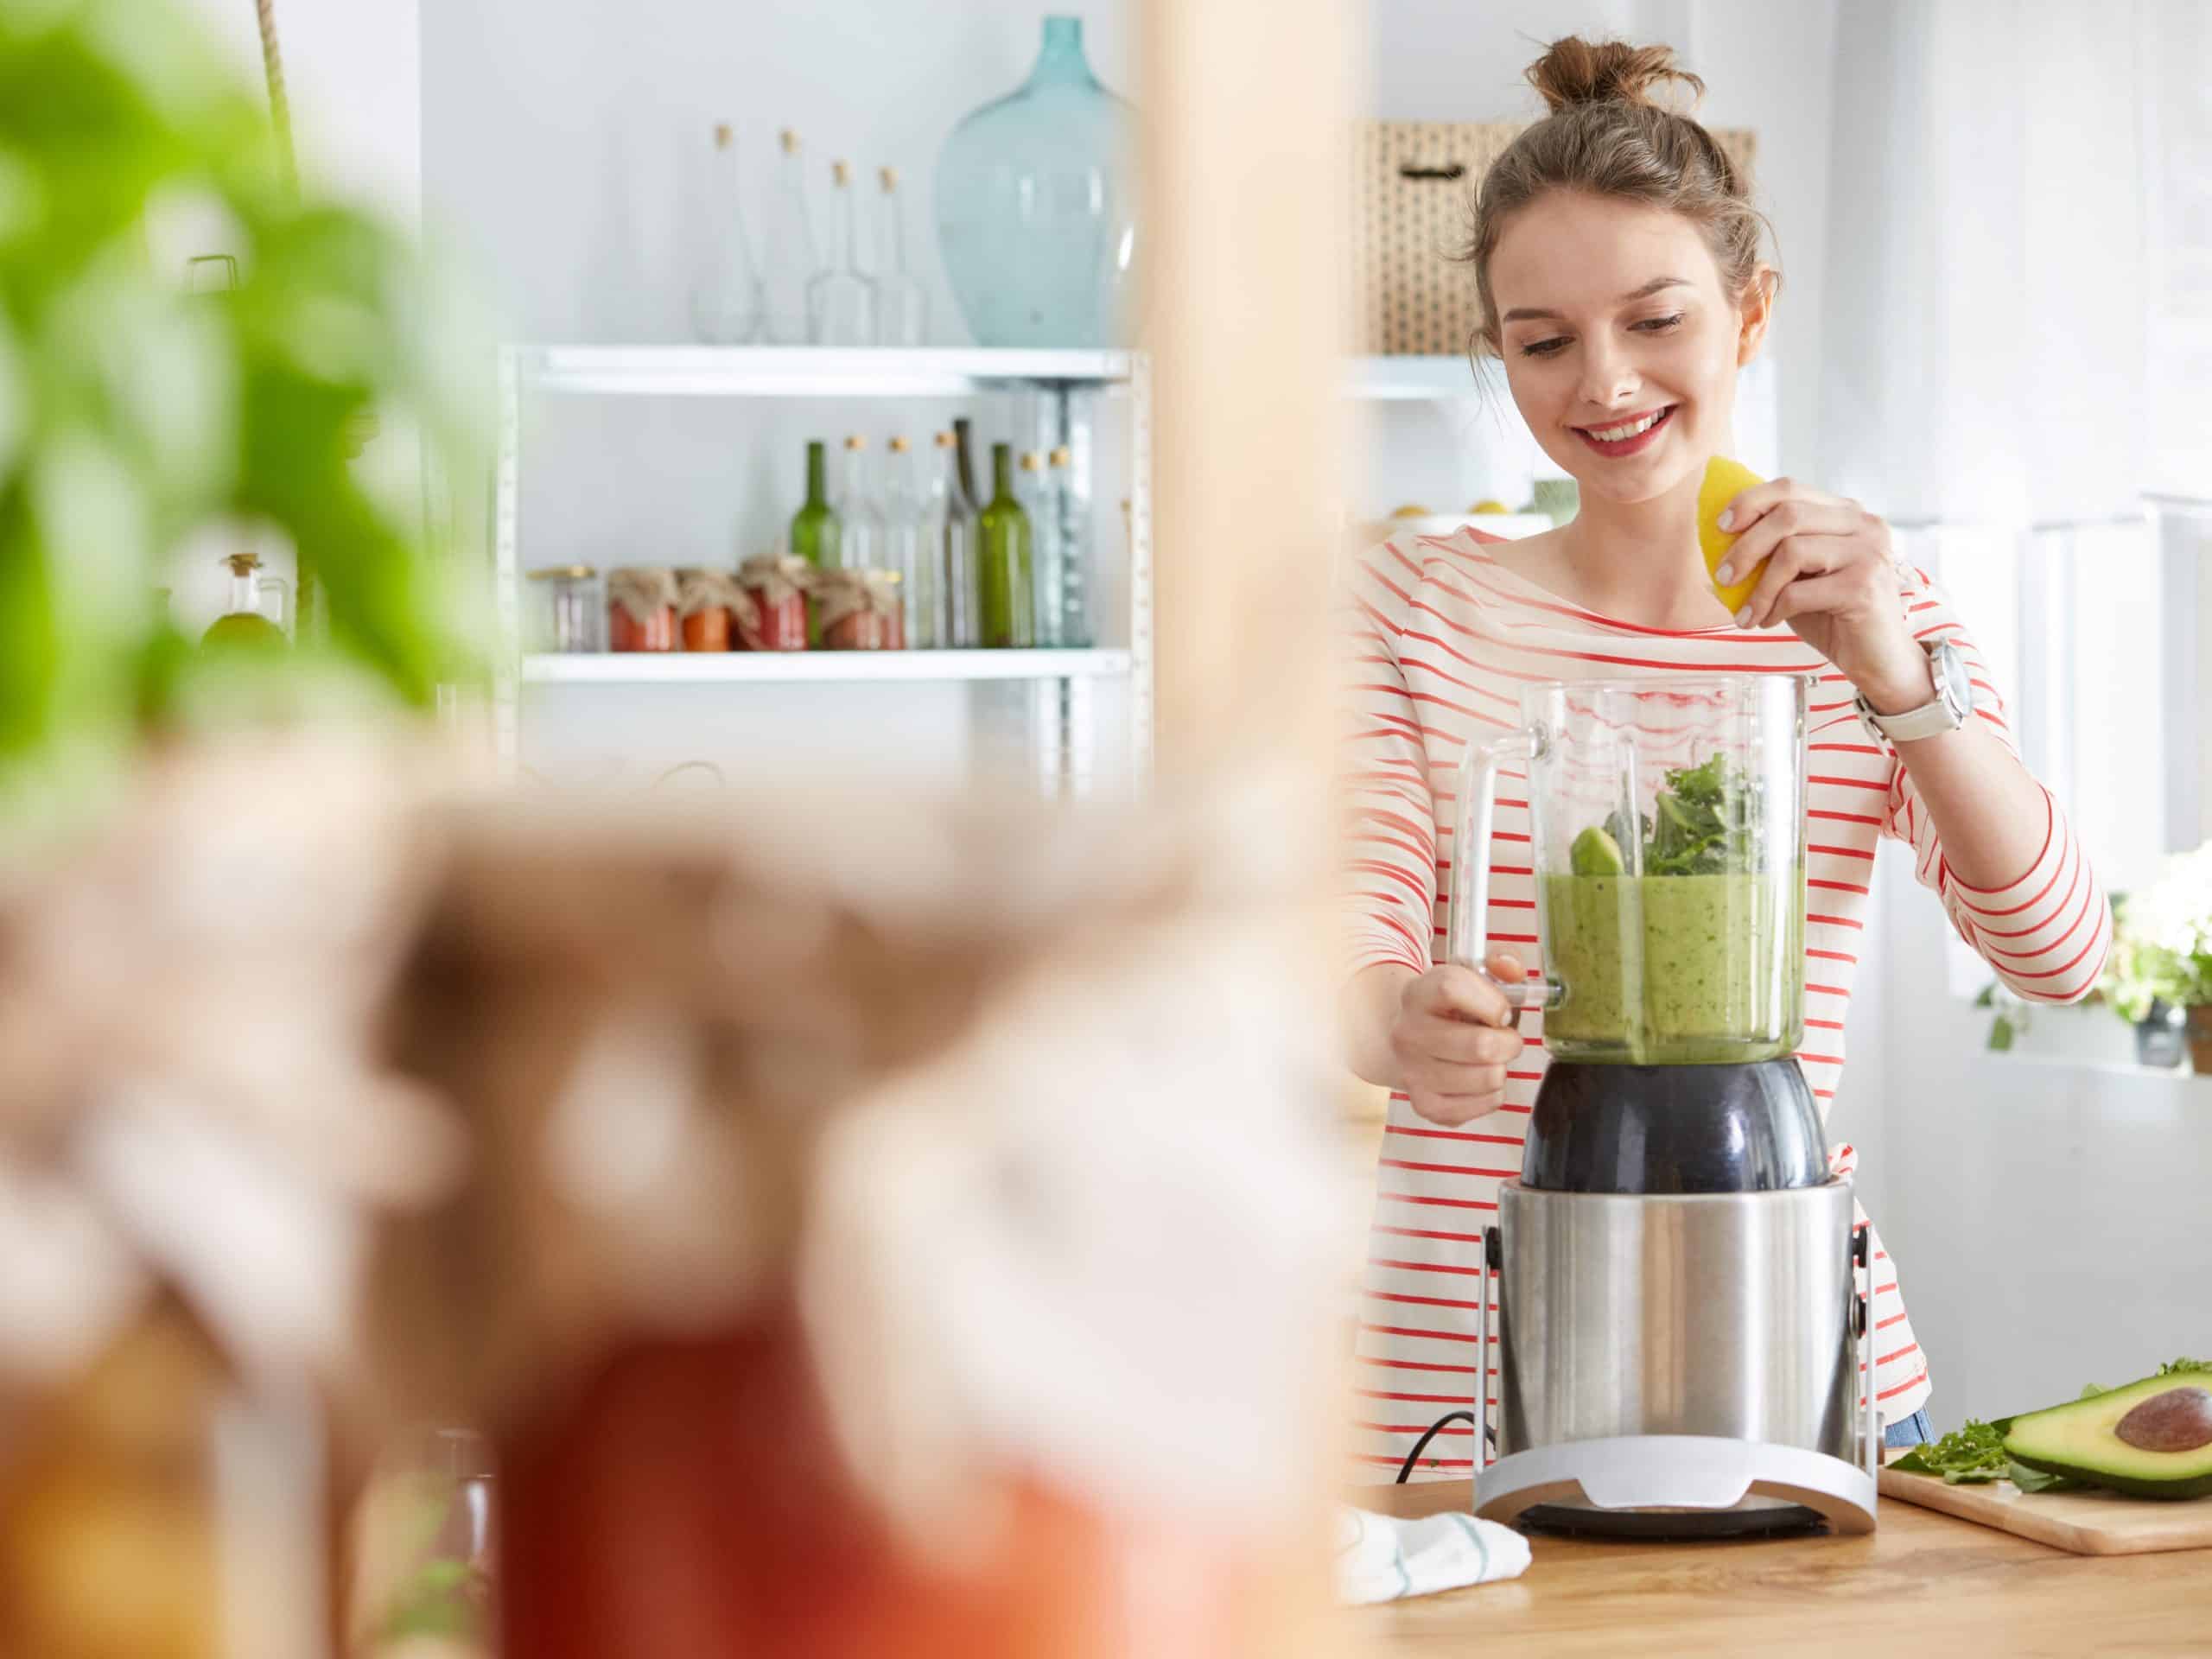 Attractive young woman making vegetable smoothie in the kitchen